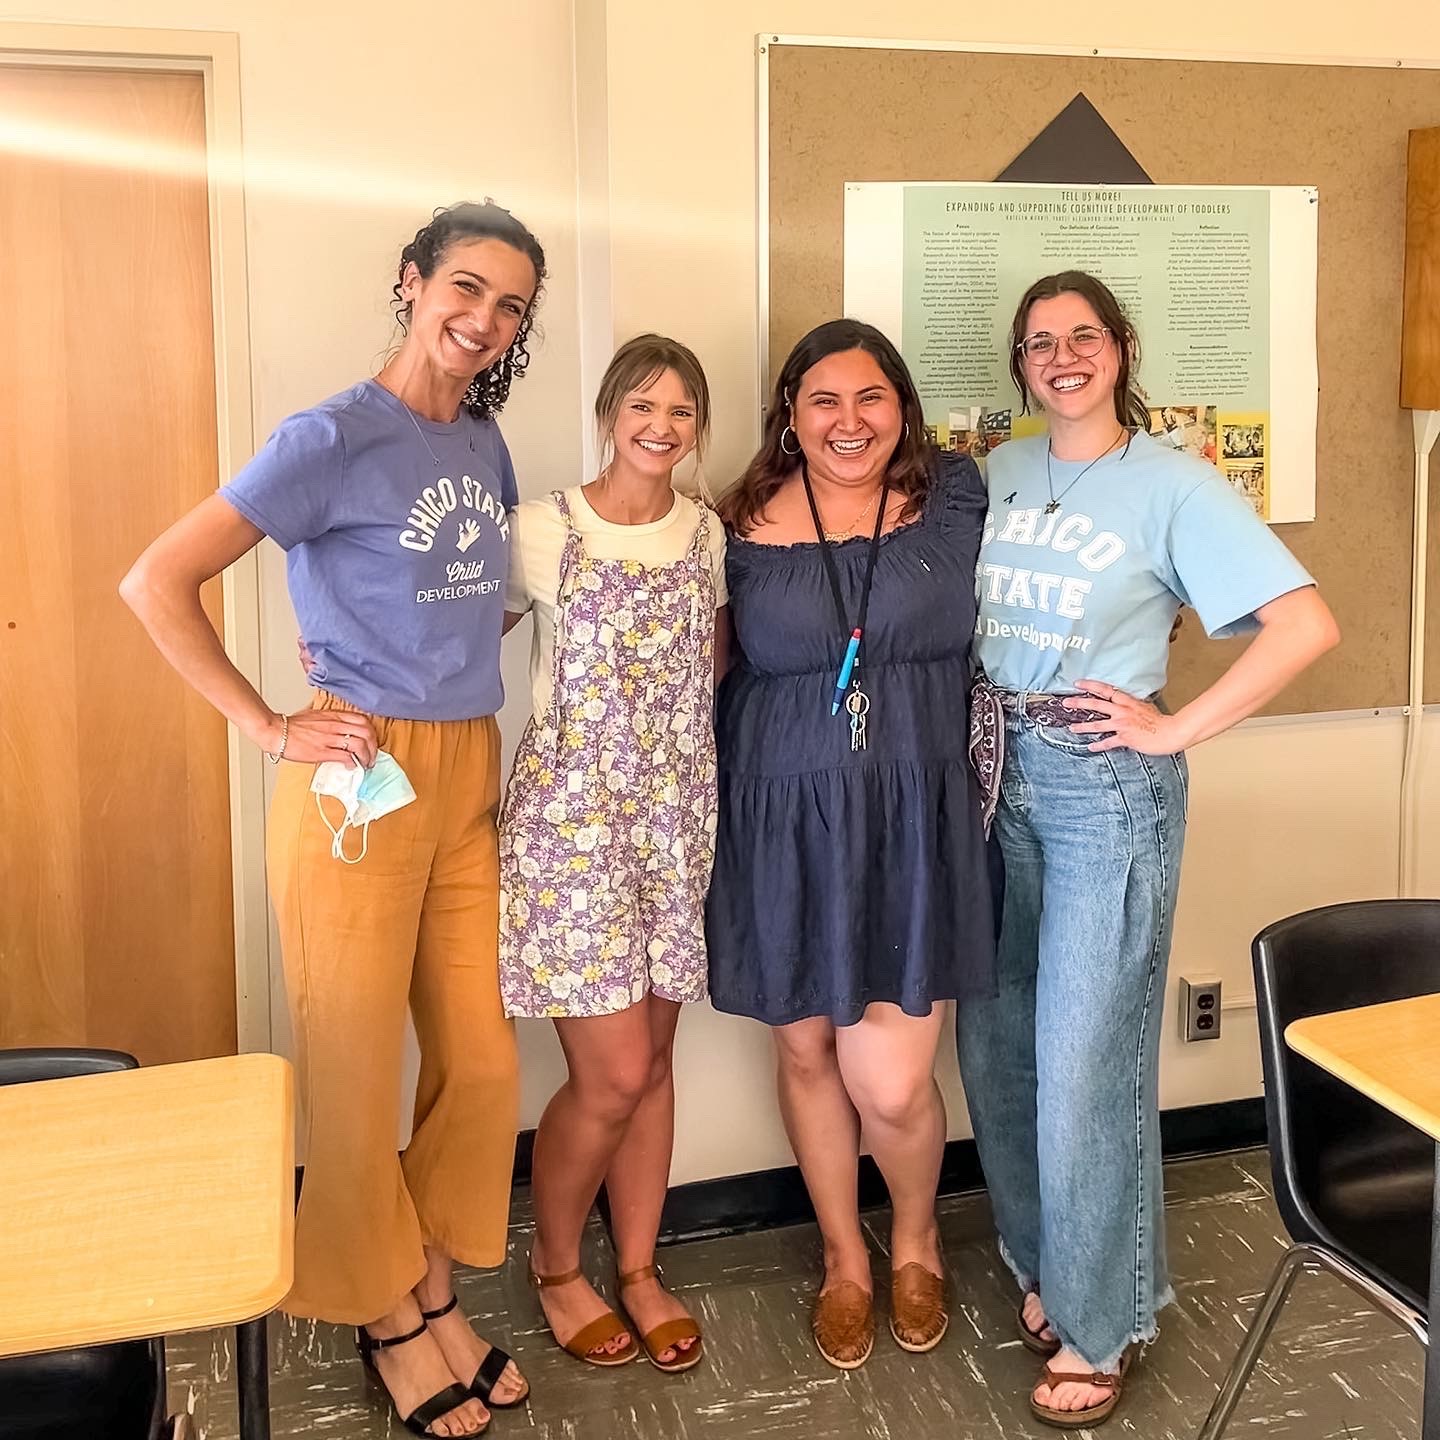 Dr. Lindsey Nenadal with former students and CDSA officers Natalie Rosander, Elenie Perez, and Alyssa Telles.